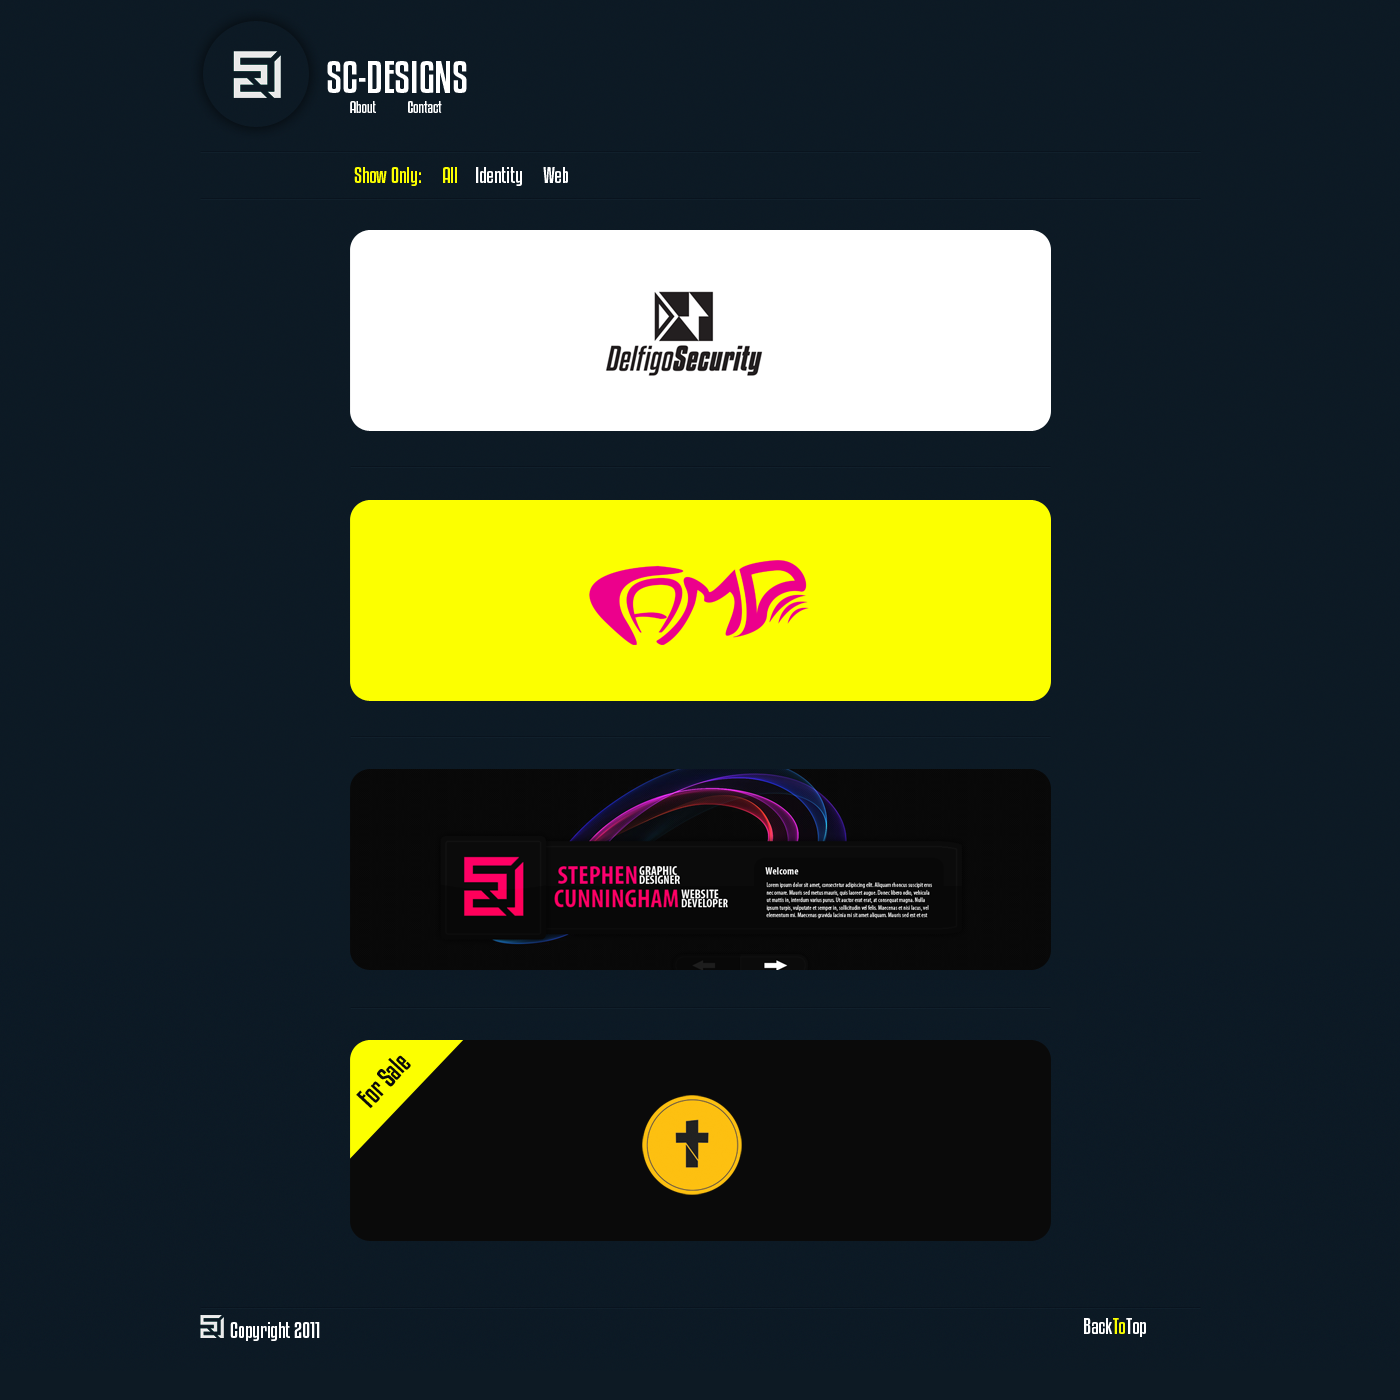 simple_portfolio_by_stevey17-d3lhdhf.png